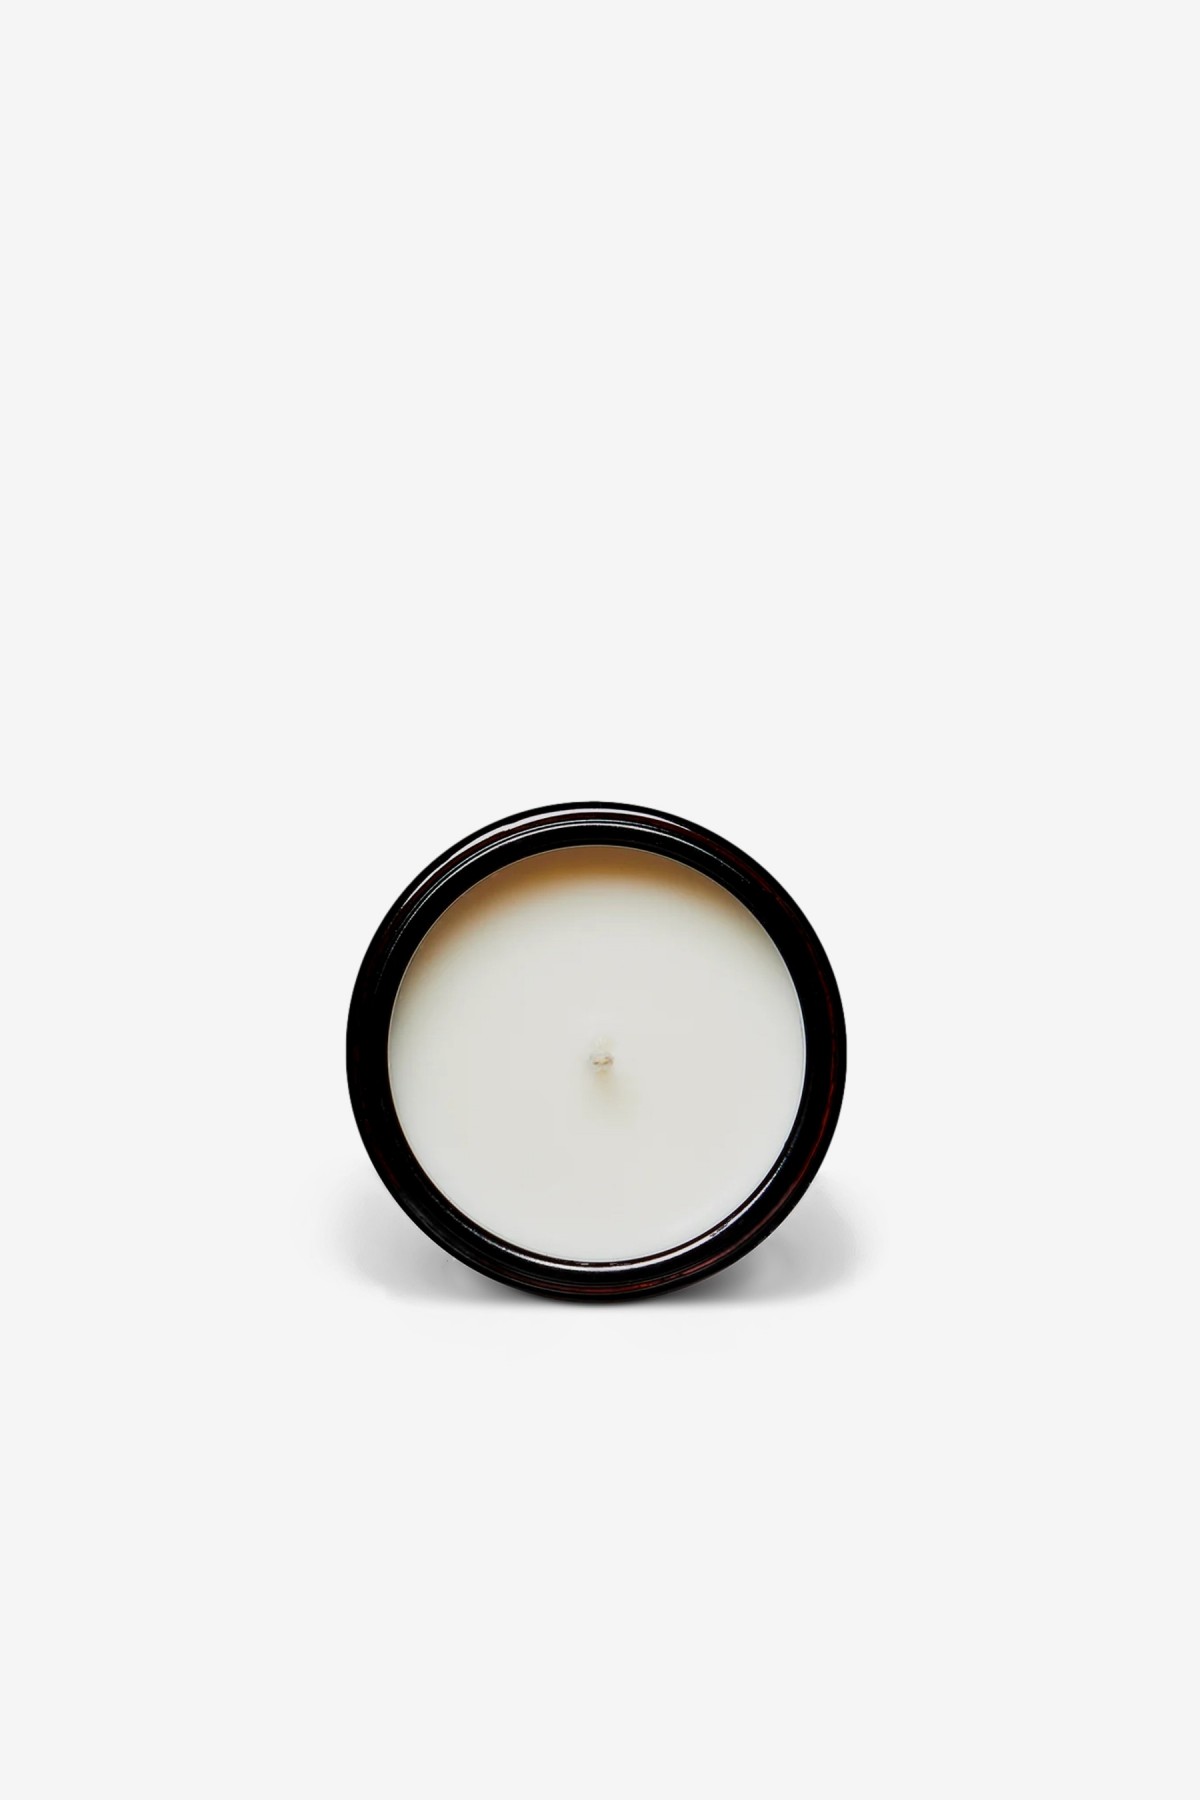 Earl of East Soy Wax Candle 170ml in Strand